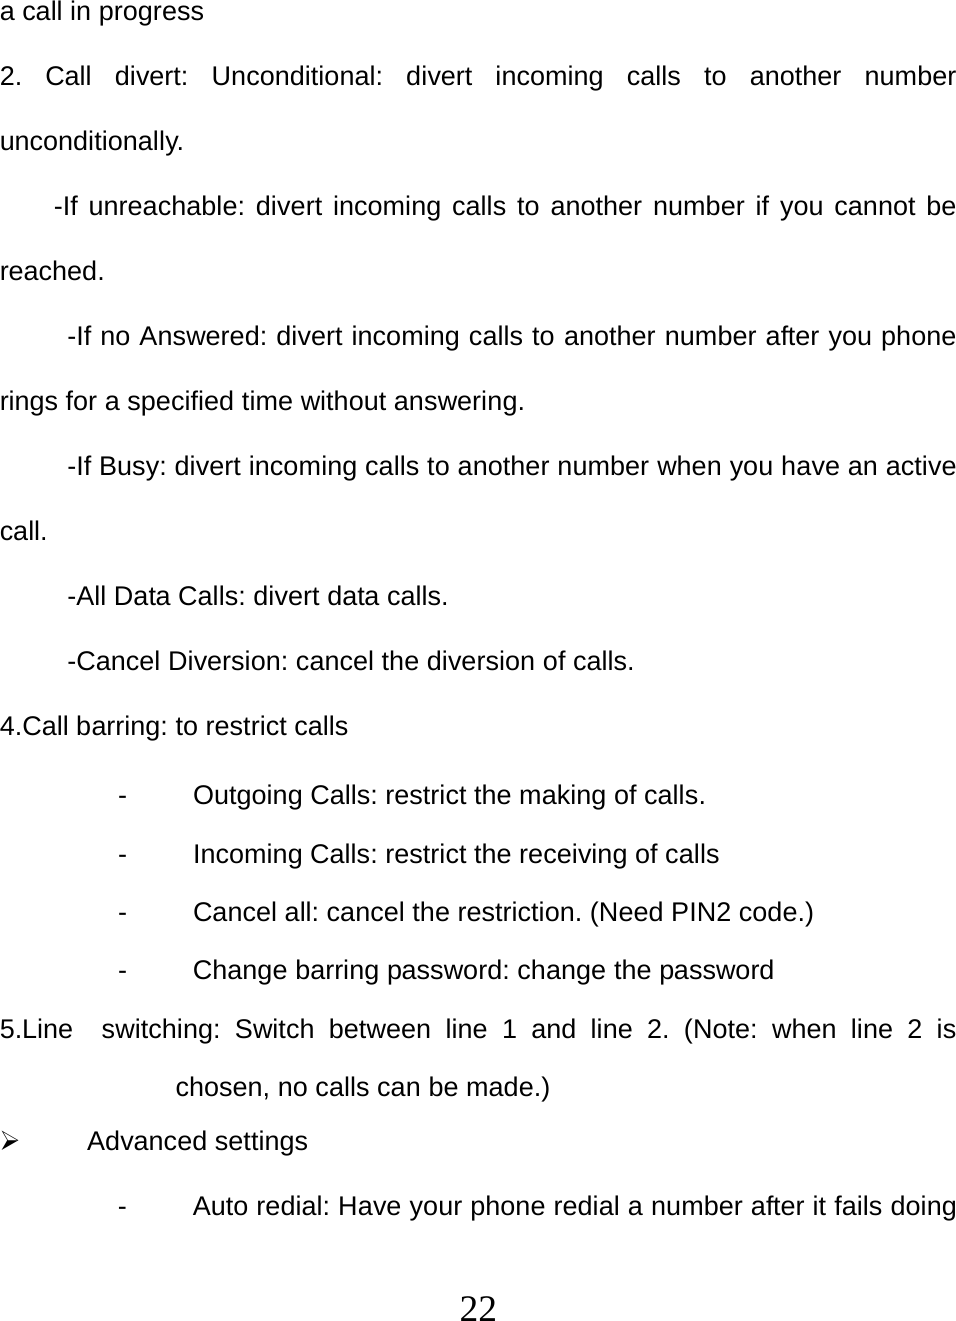   22a call in progress 2. Call divert: Unconditional: divert incoming calls to another number unconditionally. -If unreachable: divert incoming calls to another number if you cannot be reached. -If no Answered: divert incoming calls to another number after you phone rings for a specified time without answering. -If Busy: divert incoming calls to another number when you have an active call. -All Data Calls: divert data calls. -Cancel Diversion: cancel the diversion of calls. 4.Call barring: to restrict calls -  Outgoing Calls: restrict the making of calls. -  Incoming Calls: restrict the receiving of calls -  Cancel all: cancel the restriction. (Need PIN2 code.) -  Change barring password: change the password 5.Line  switching: Switch between line 1 and line 2. (Note: when line 2 is chosen, no calls can be made.)  Advanced settings -  Auto redial: Have your phone redial a number after it fails doing 